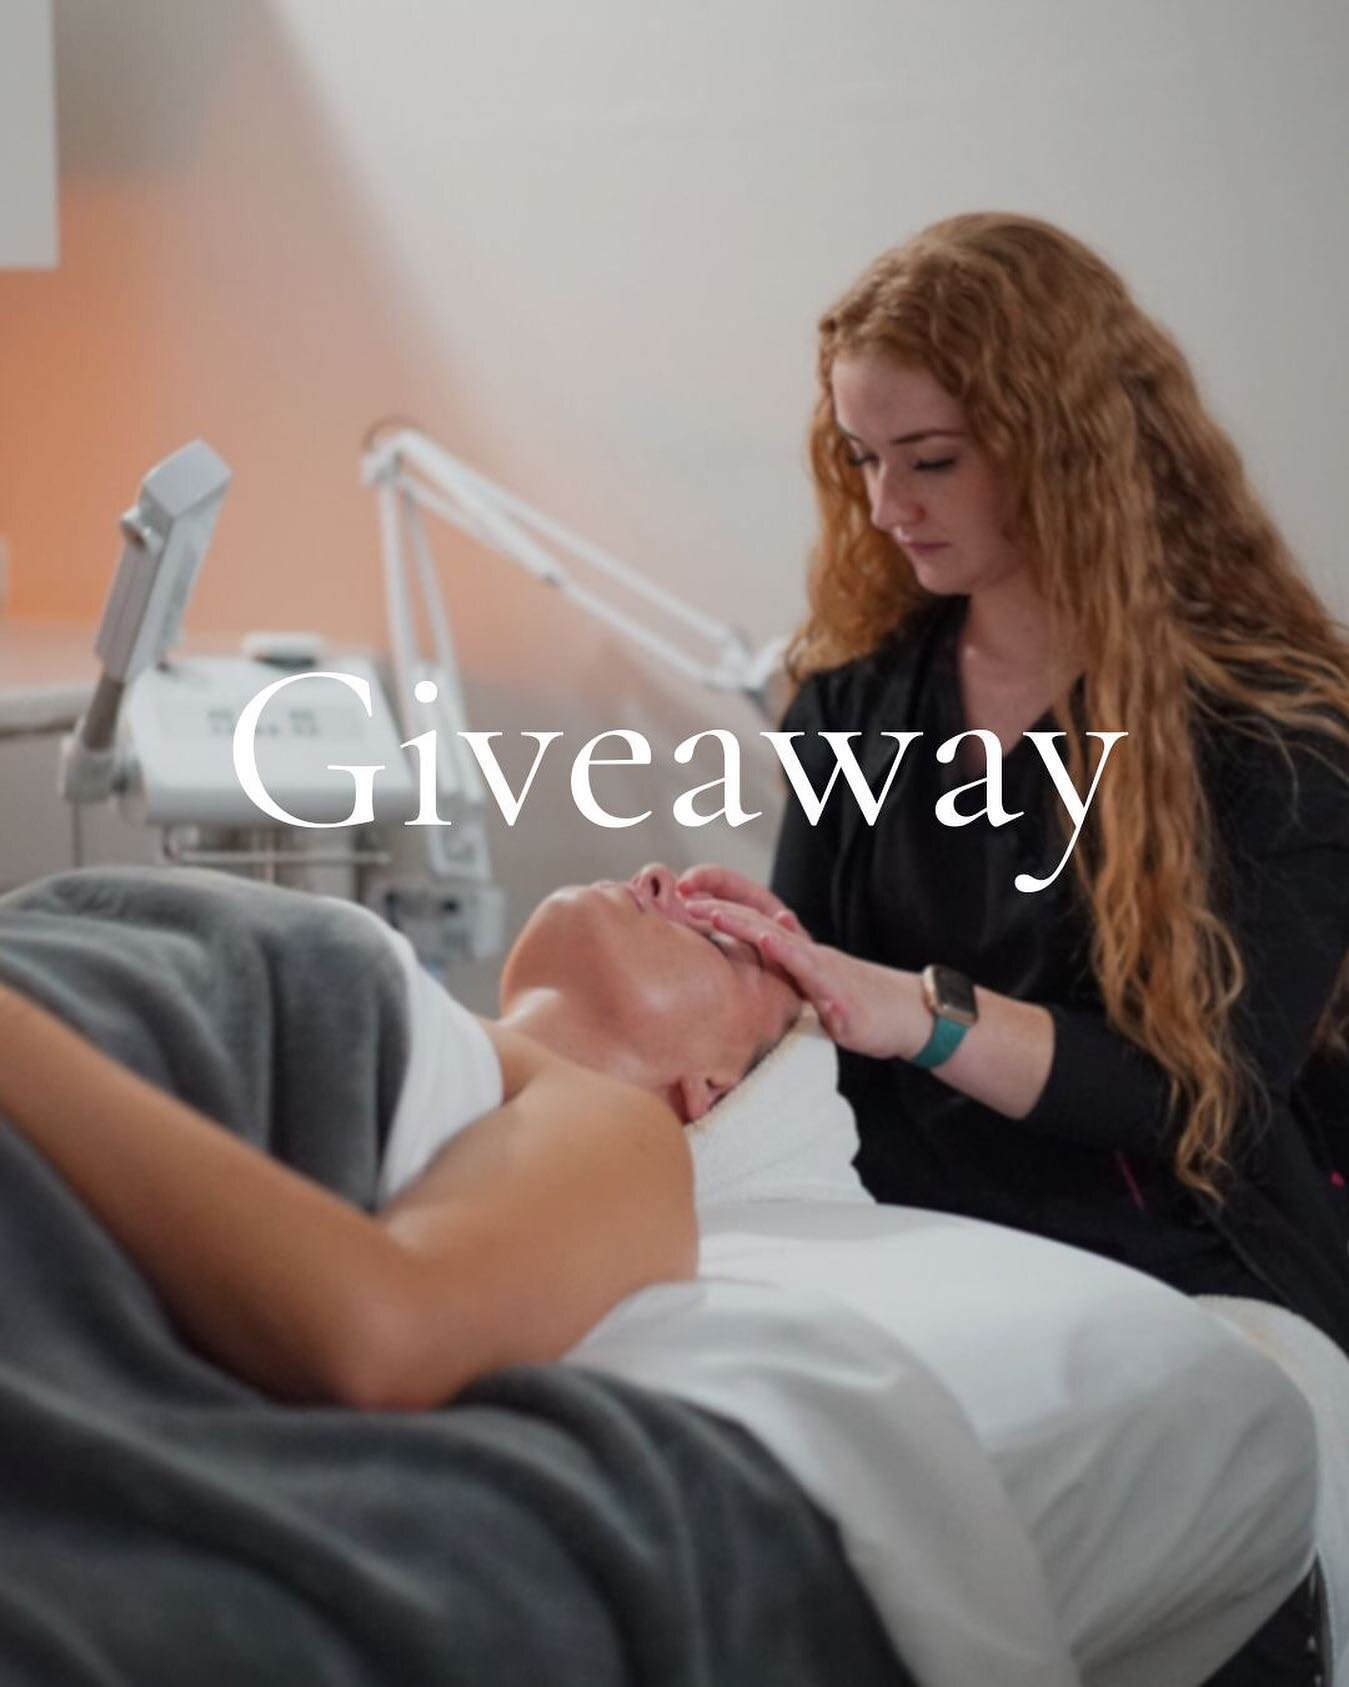 GIVEAWAY: We are giving one lucky winner and their friend a chance to enjoy our Pumpkin Enzyme Facial!

How to enter:
&bull; Like this post + follow us @premierdayspa_utah
&bull; Tag a friend that you&rsquo;d love to get a facial with
&bull; Bonus en